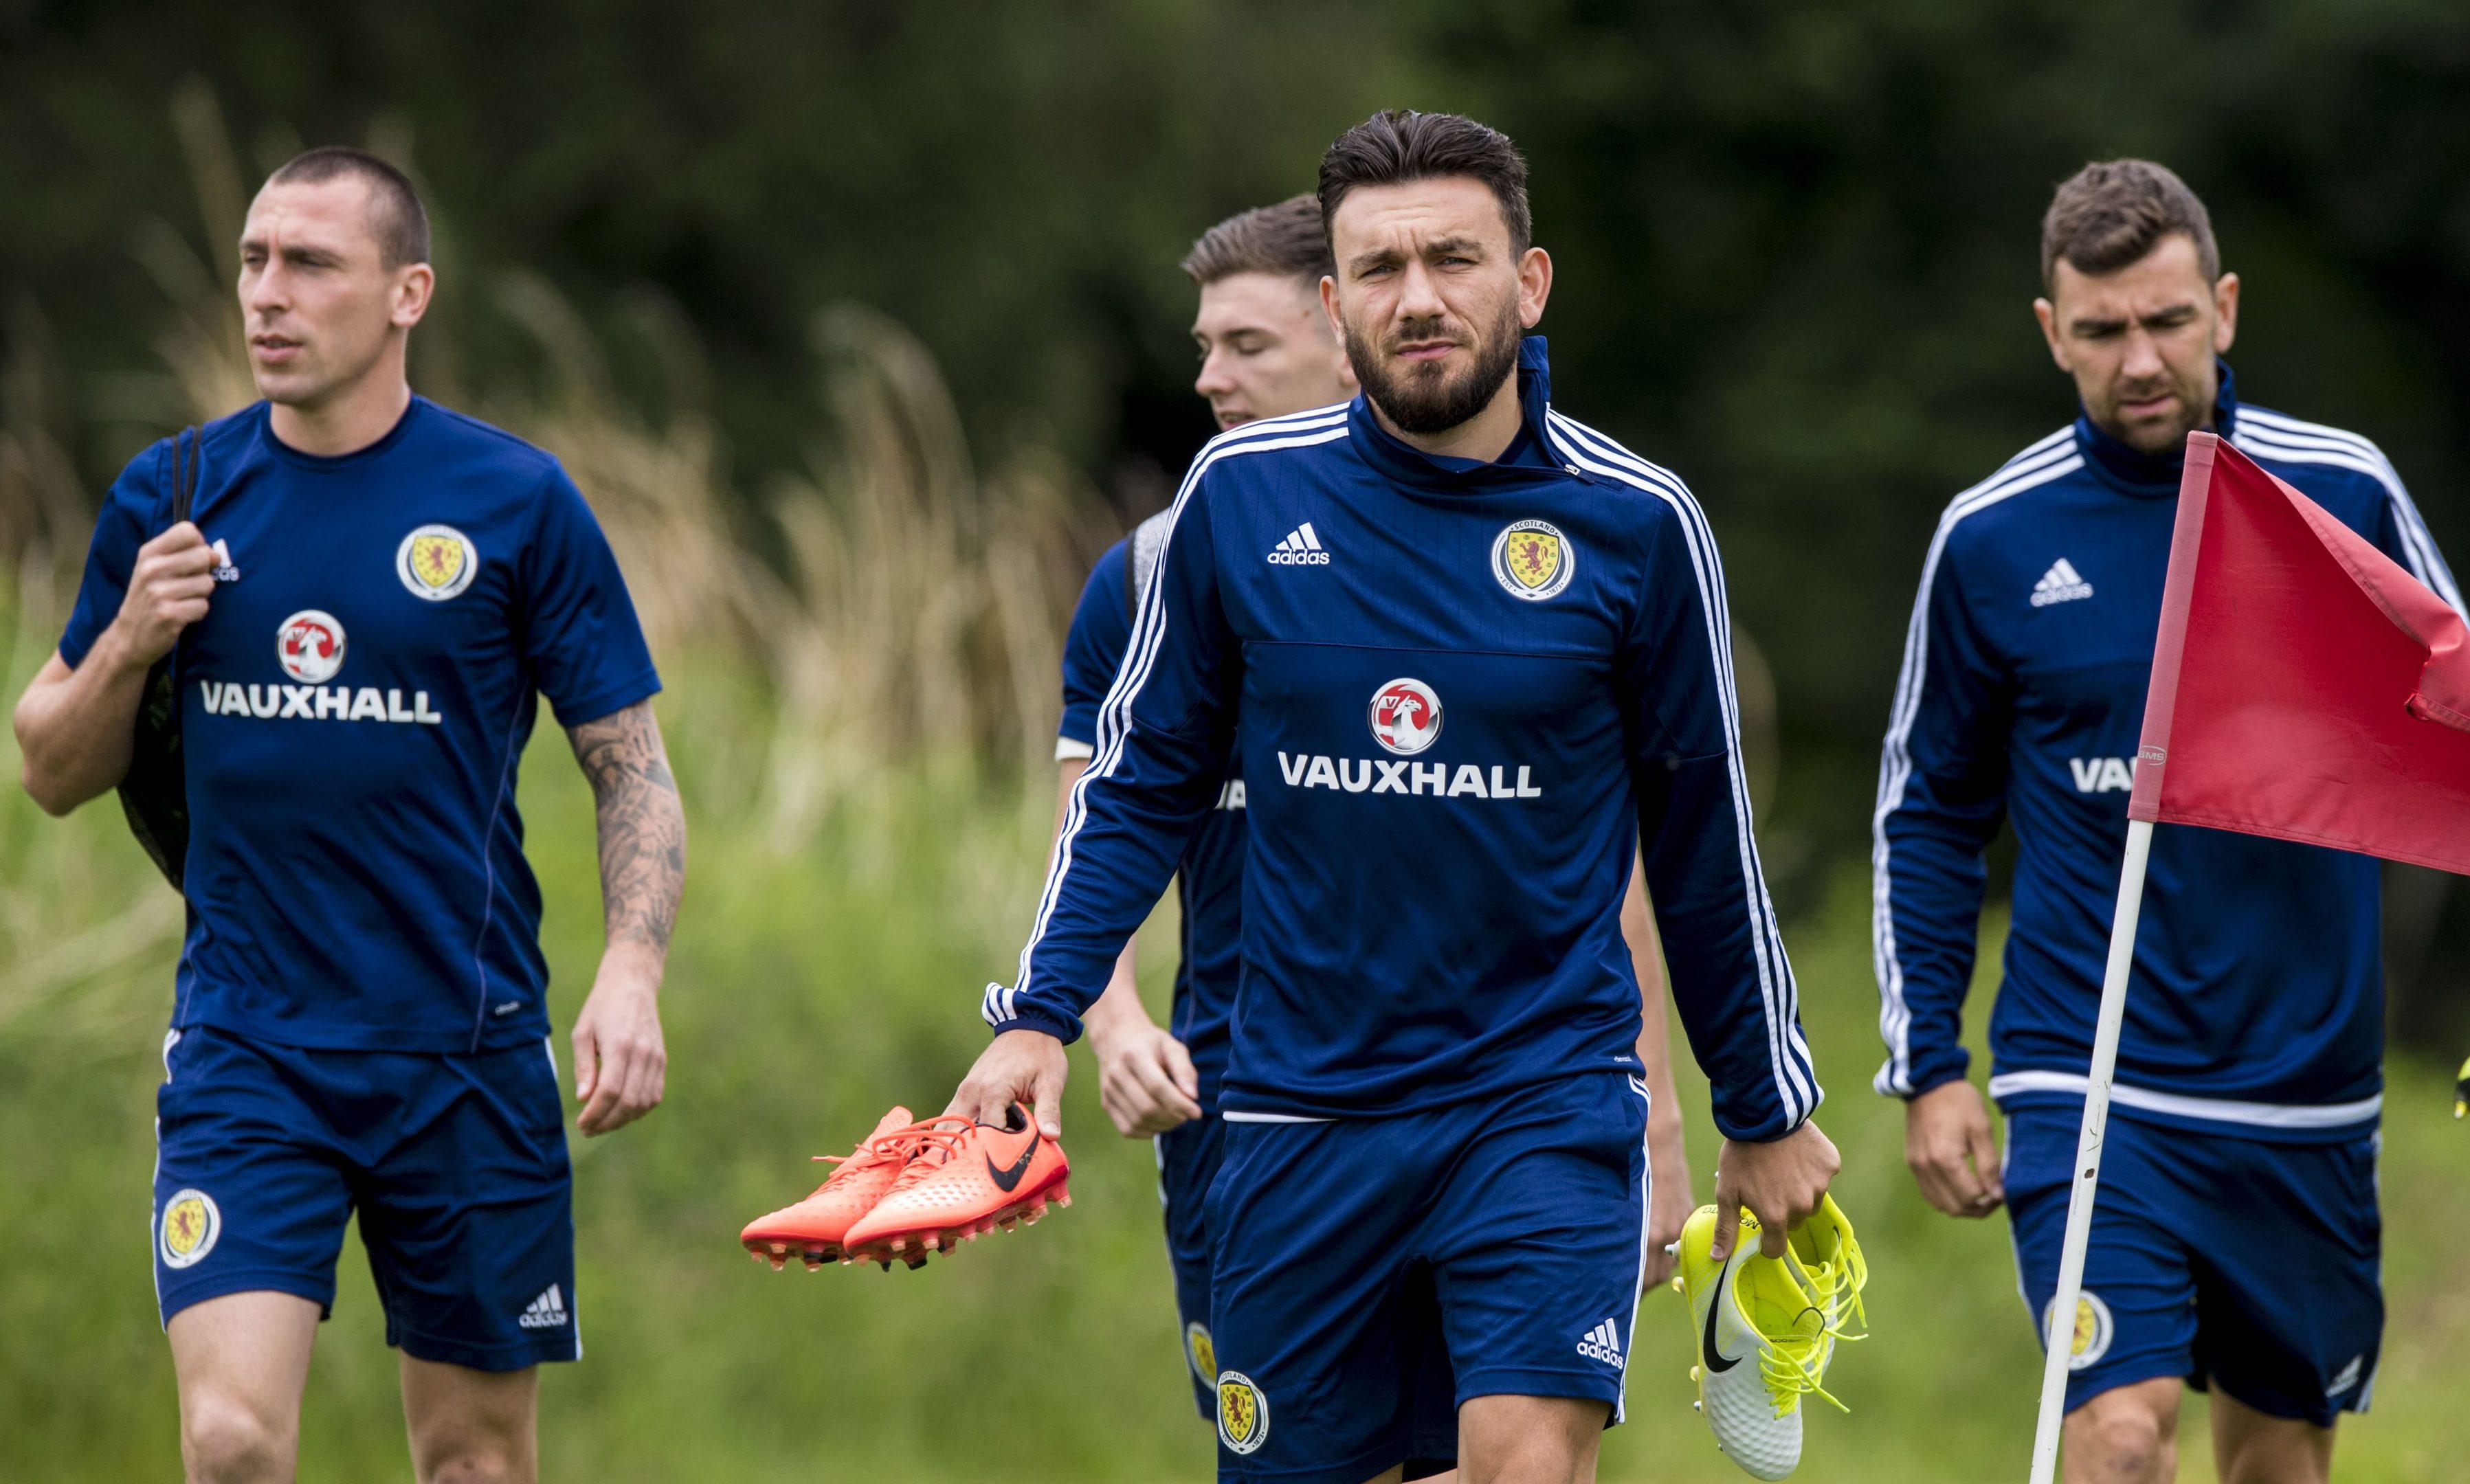 Can these Scottish players bridge the gap to their English opponents?